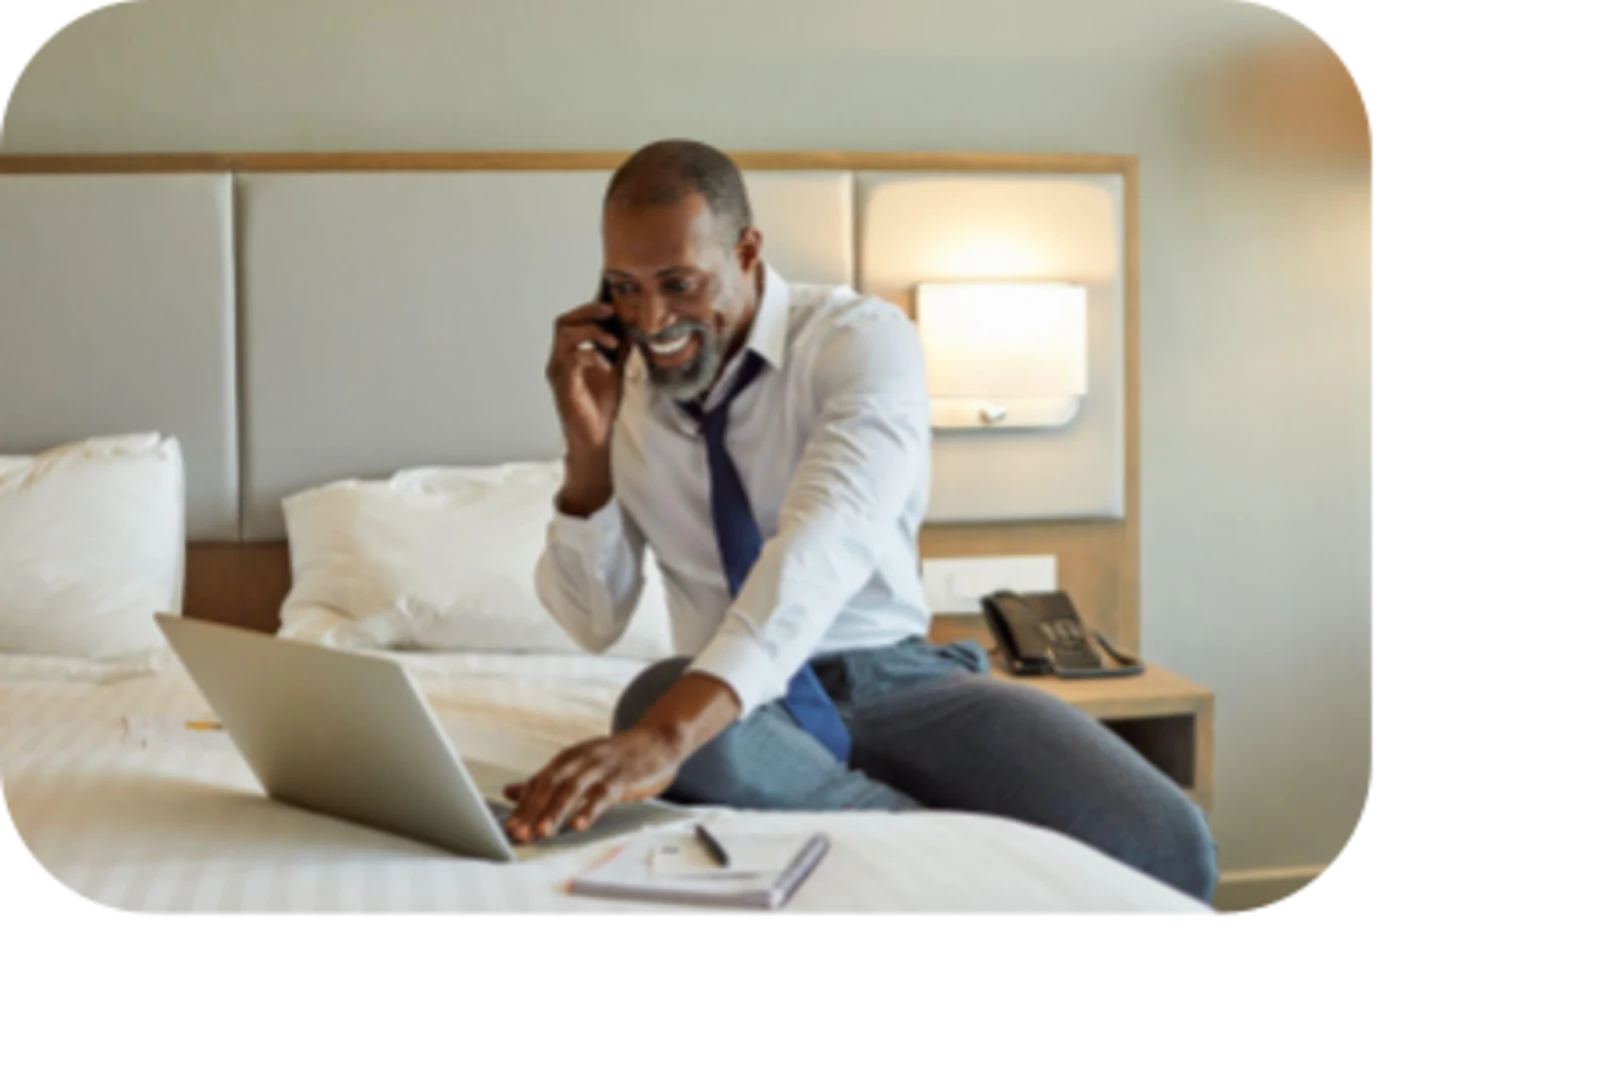 man seating on hotel room bed, using laptop and talking in phone